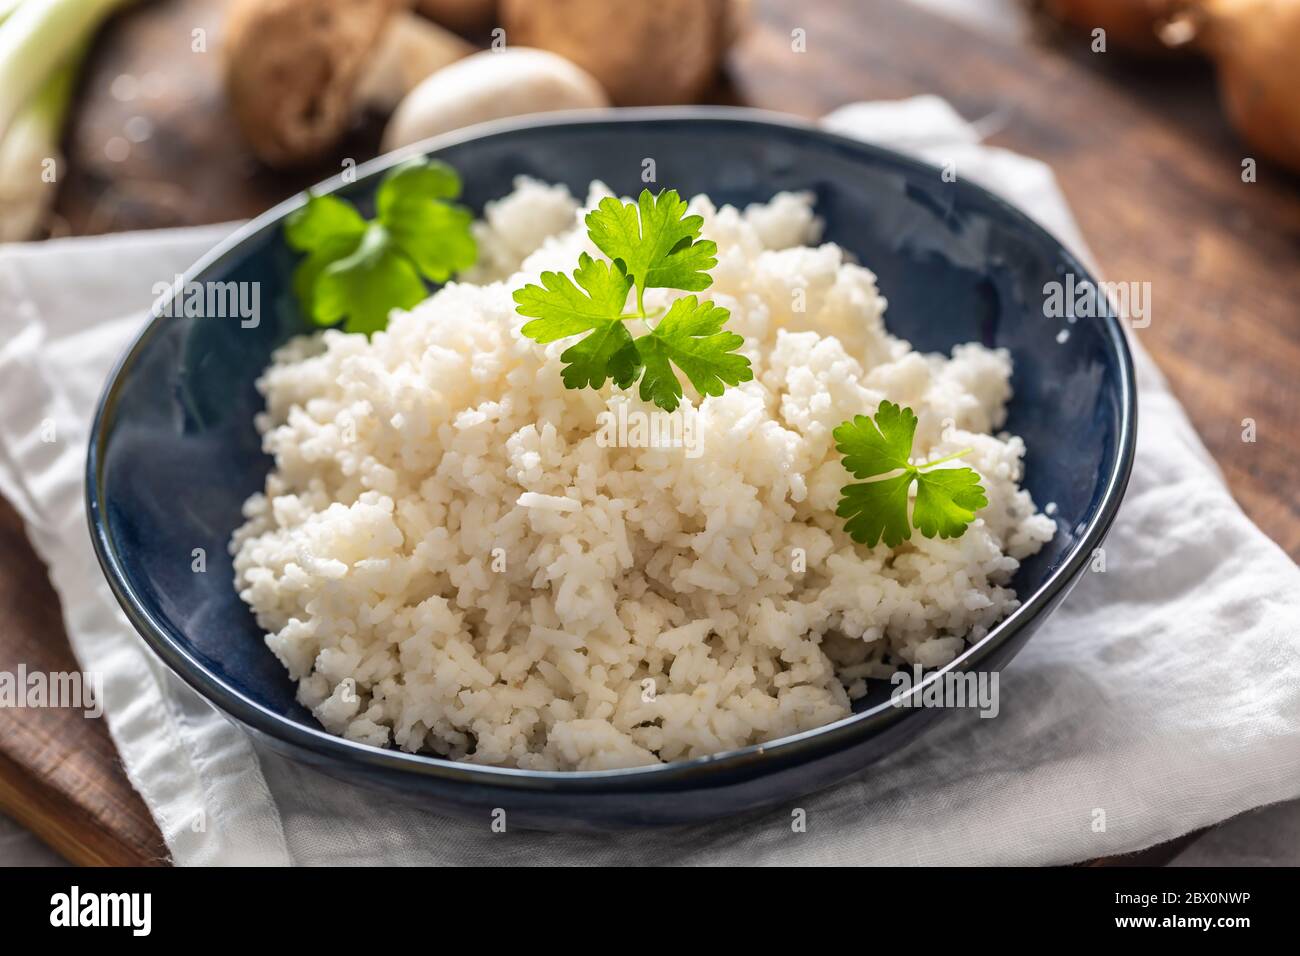 Bowl of steamed rice with mushrooms and leaks in the background Stock Photo